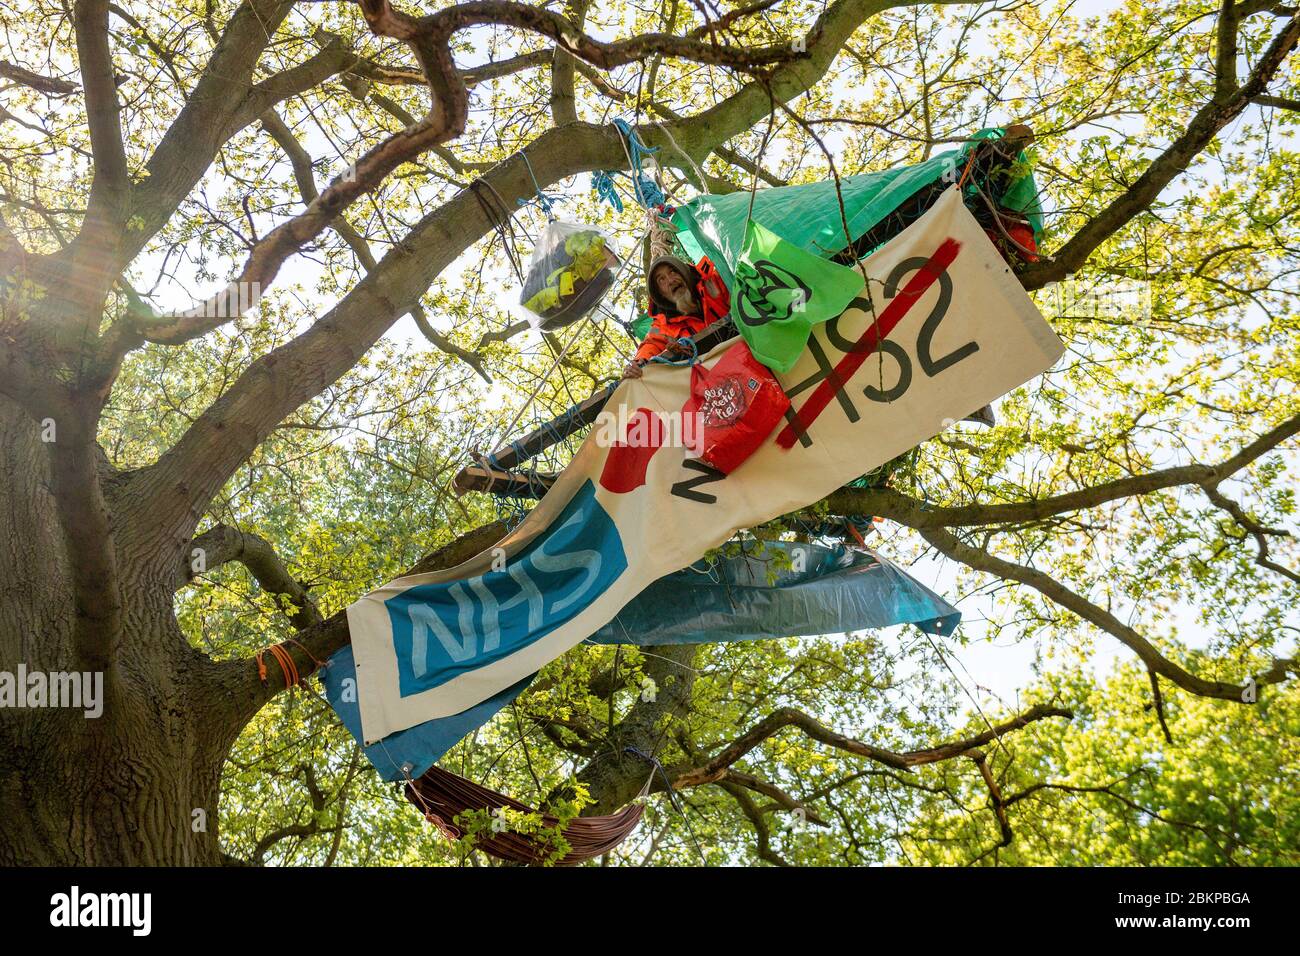 An anti-HS2 protester named Potts positioned in a tree in Crackley Woods, near Kenilworth, Warwickshire. The protesters have set up a makeshift camp in the ancient woodland, which they claim is under threat from the construction of HS2. Stock Photo